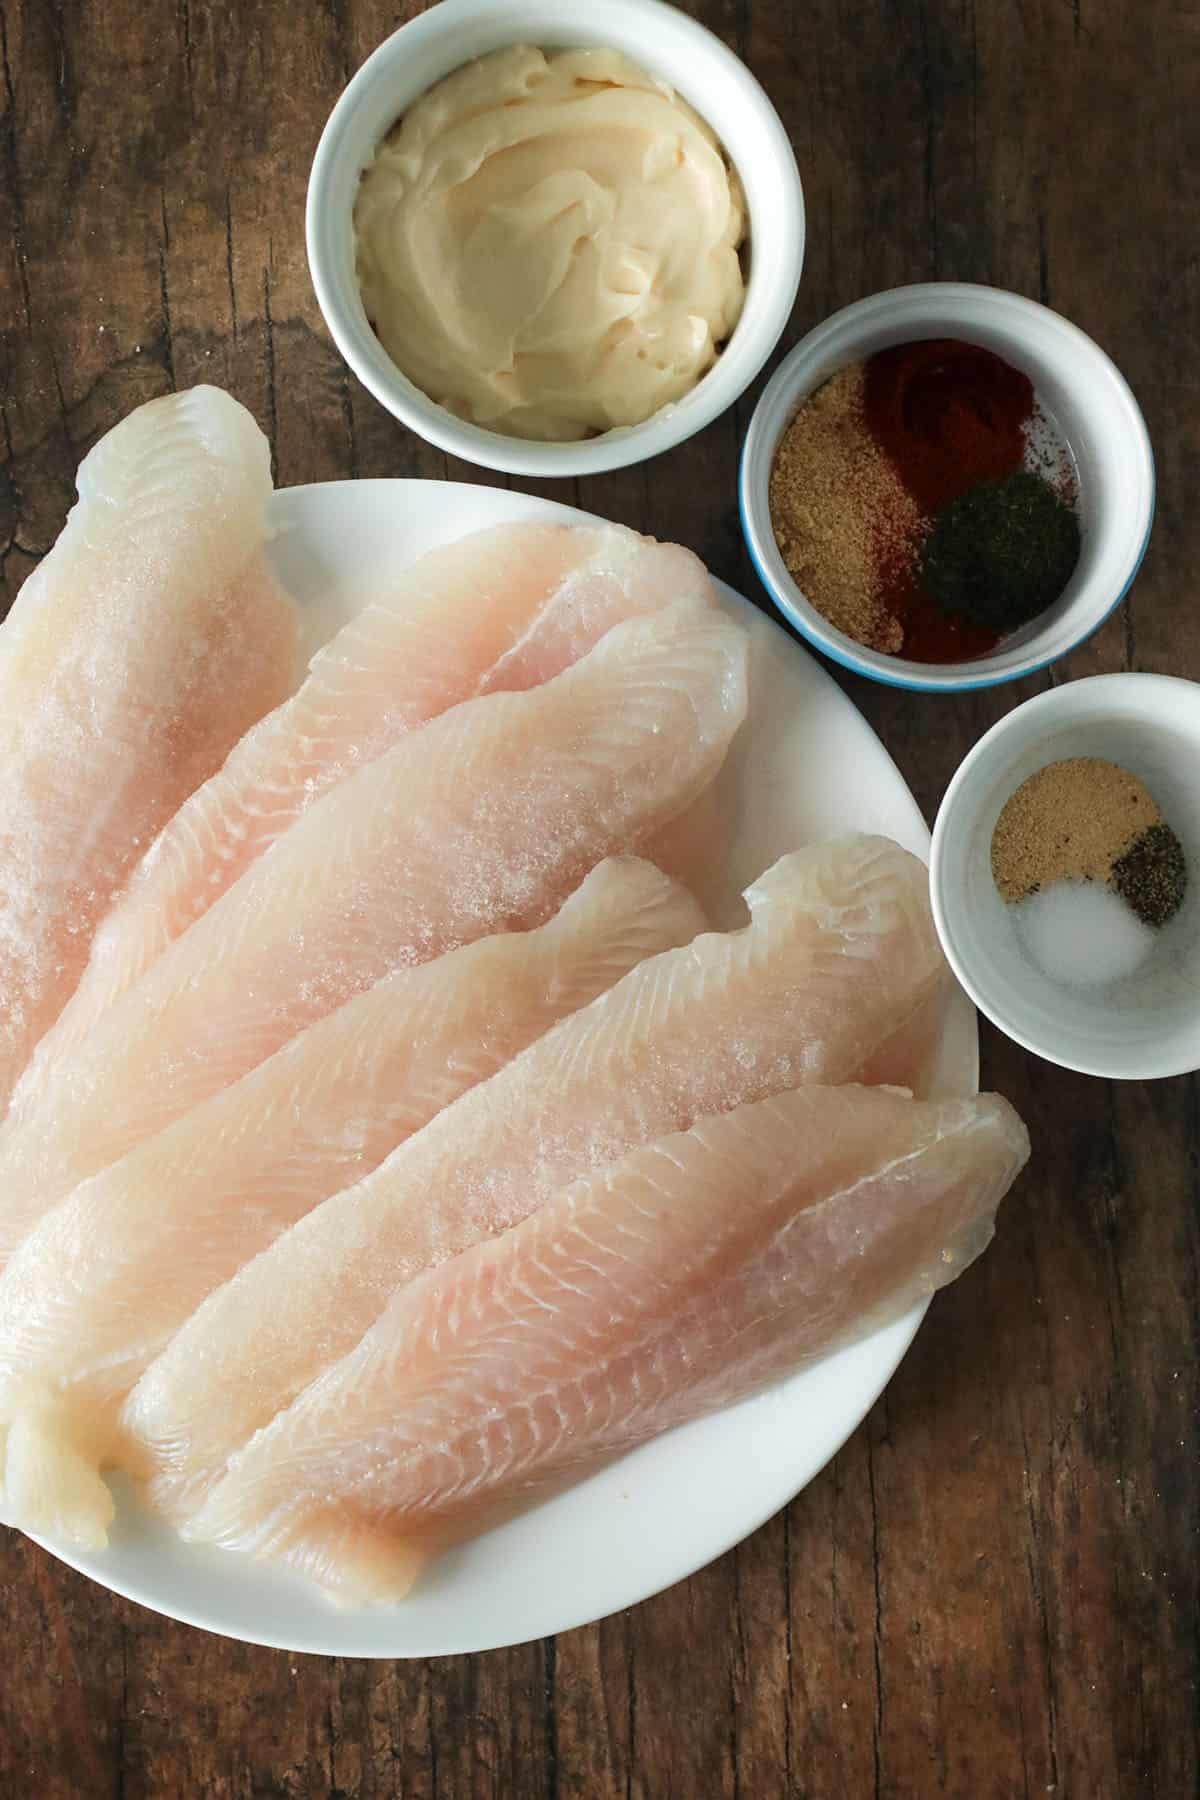 The ingredients for the baked fish.